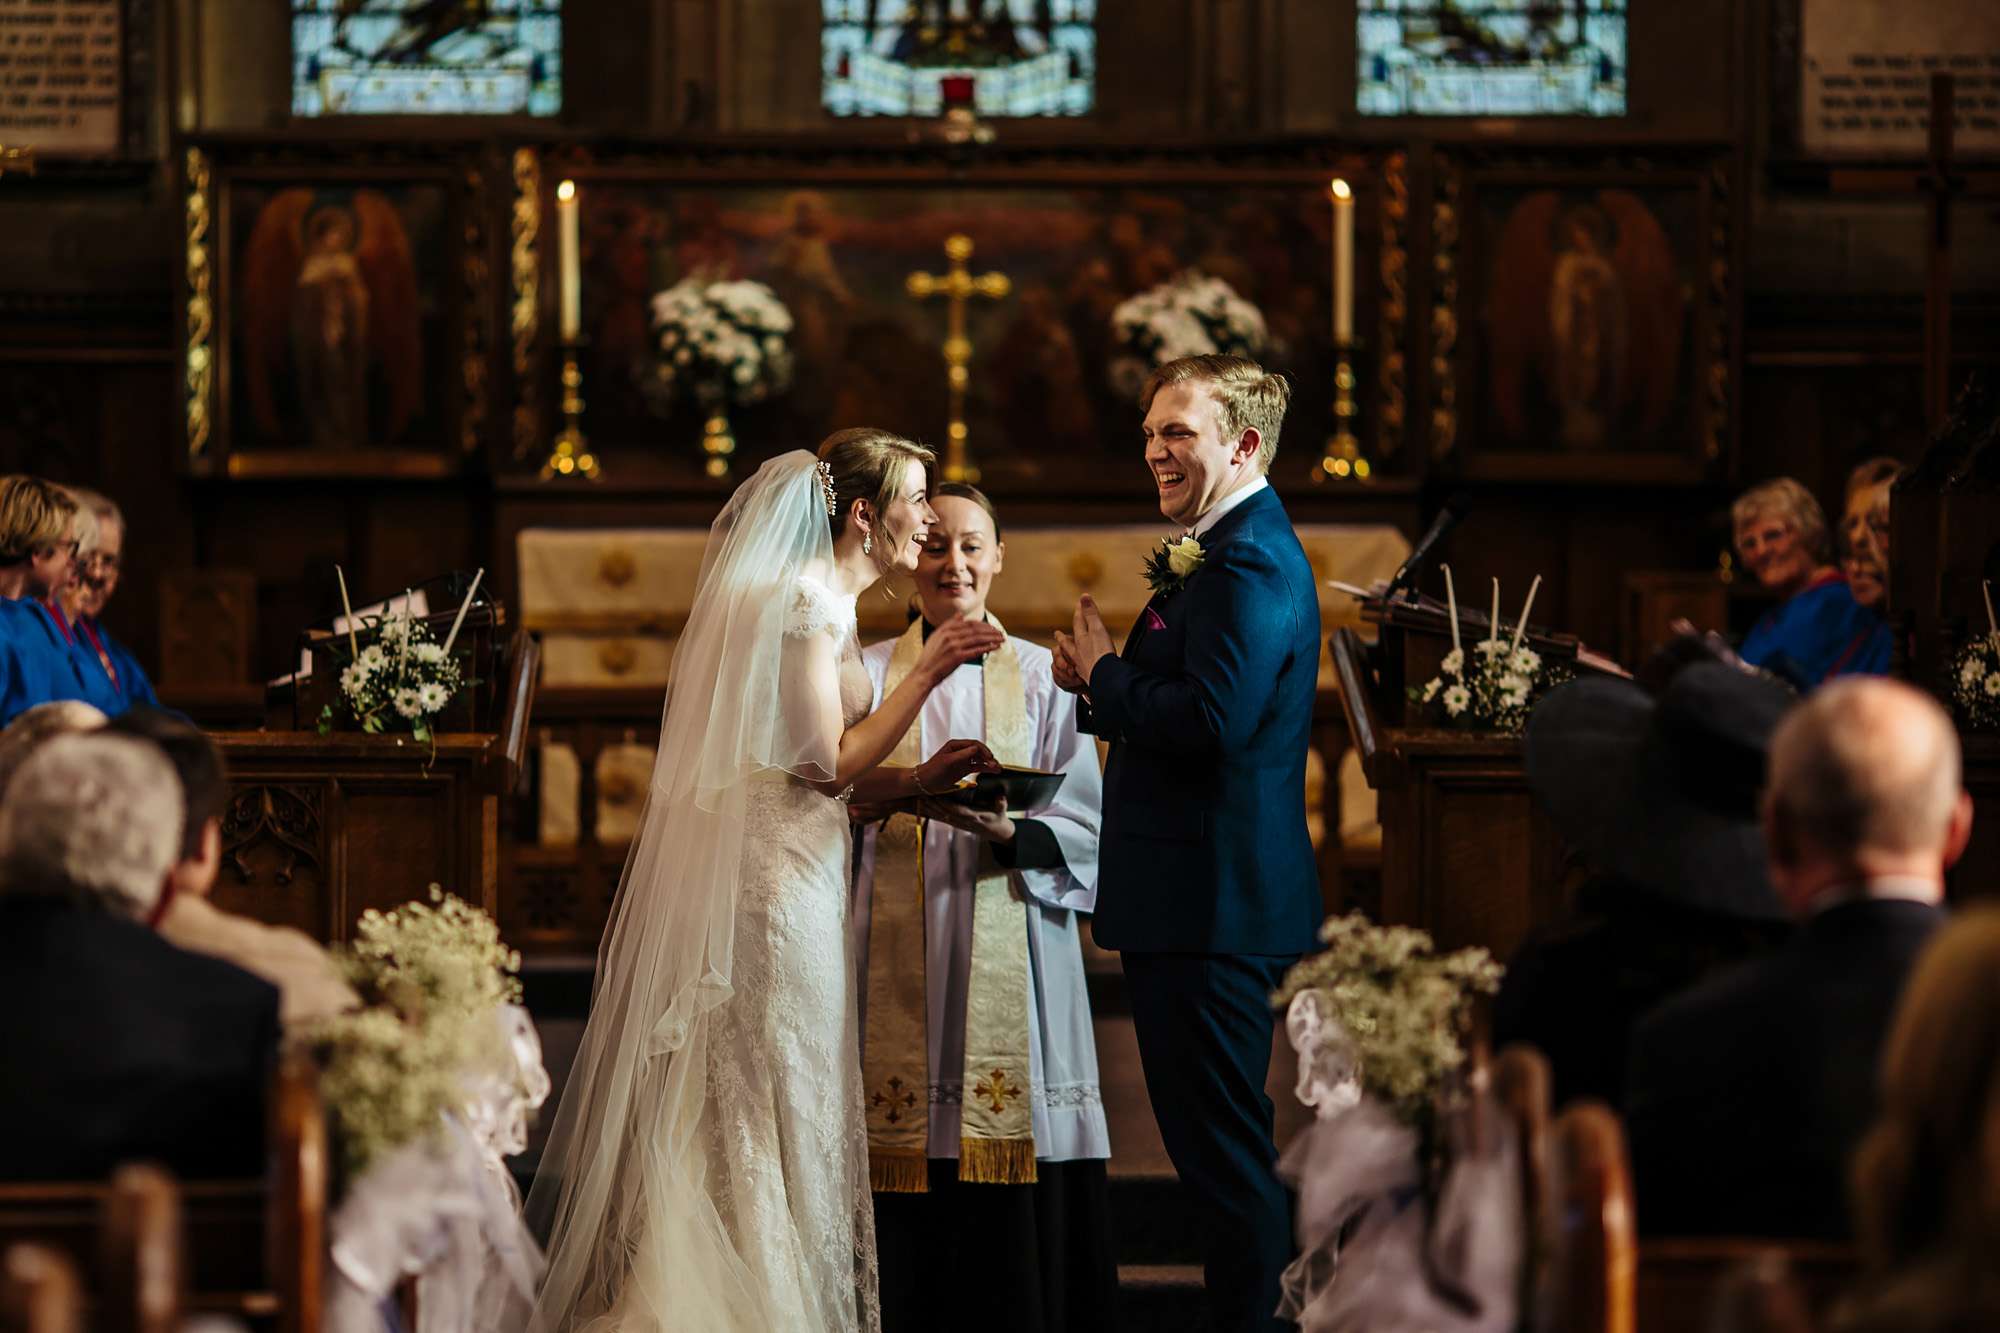 Bride and groom laughing during their church wedding ceremony